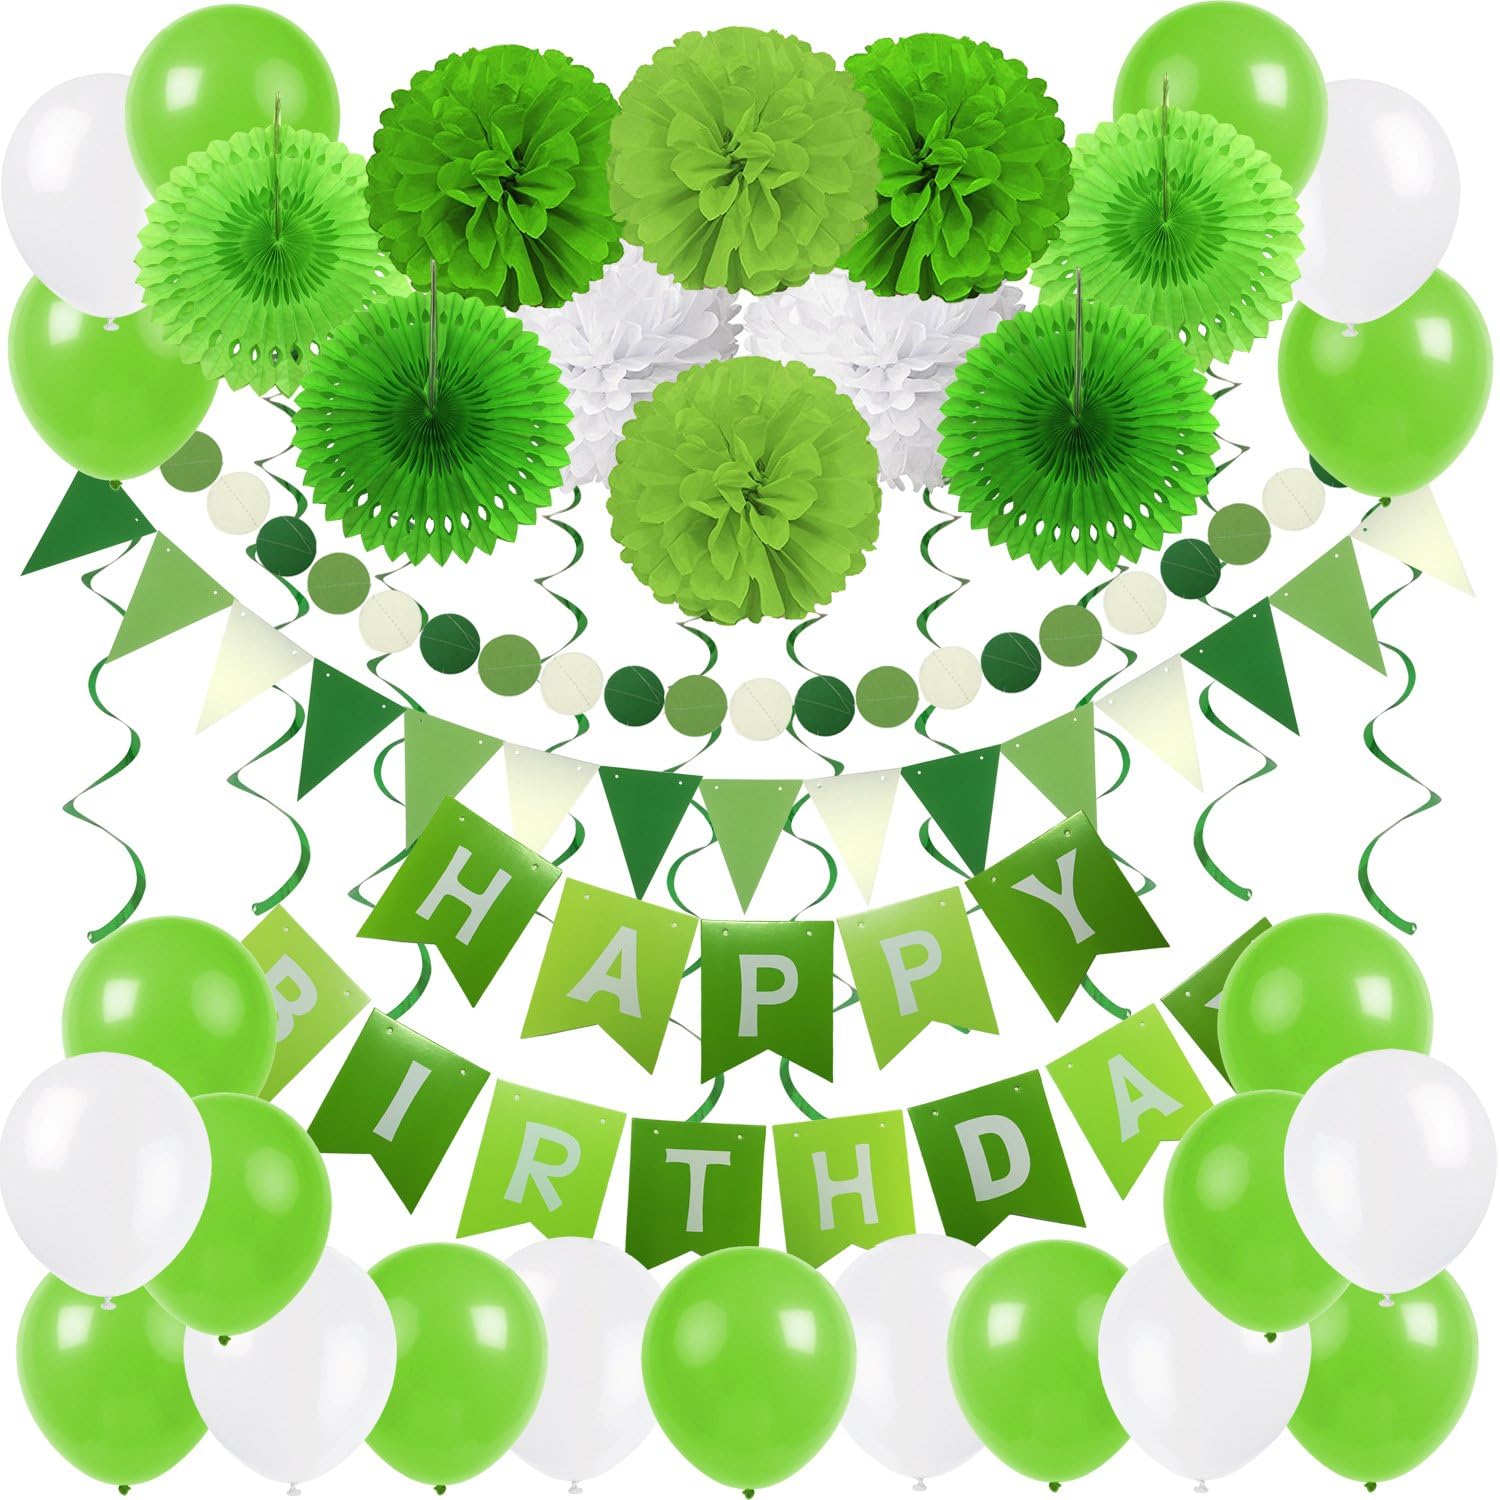 ZERODECO Birthday Party Decoration, Happy Birthday Banner Bunting with 4 Paper Fans Tissue 6 Paper Pom Poms Flower 10 Hanging Swirl and 20 Balloon for Birthday Party Decorations -Green and White